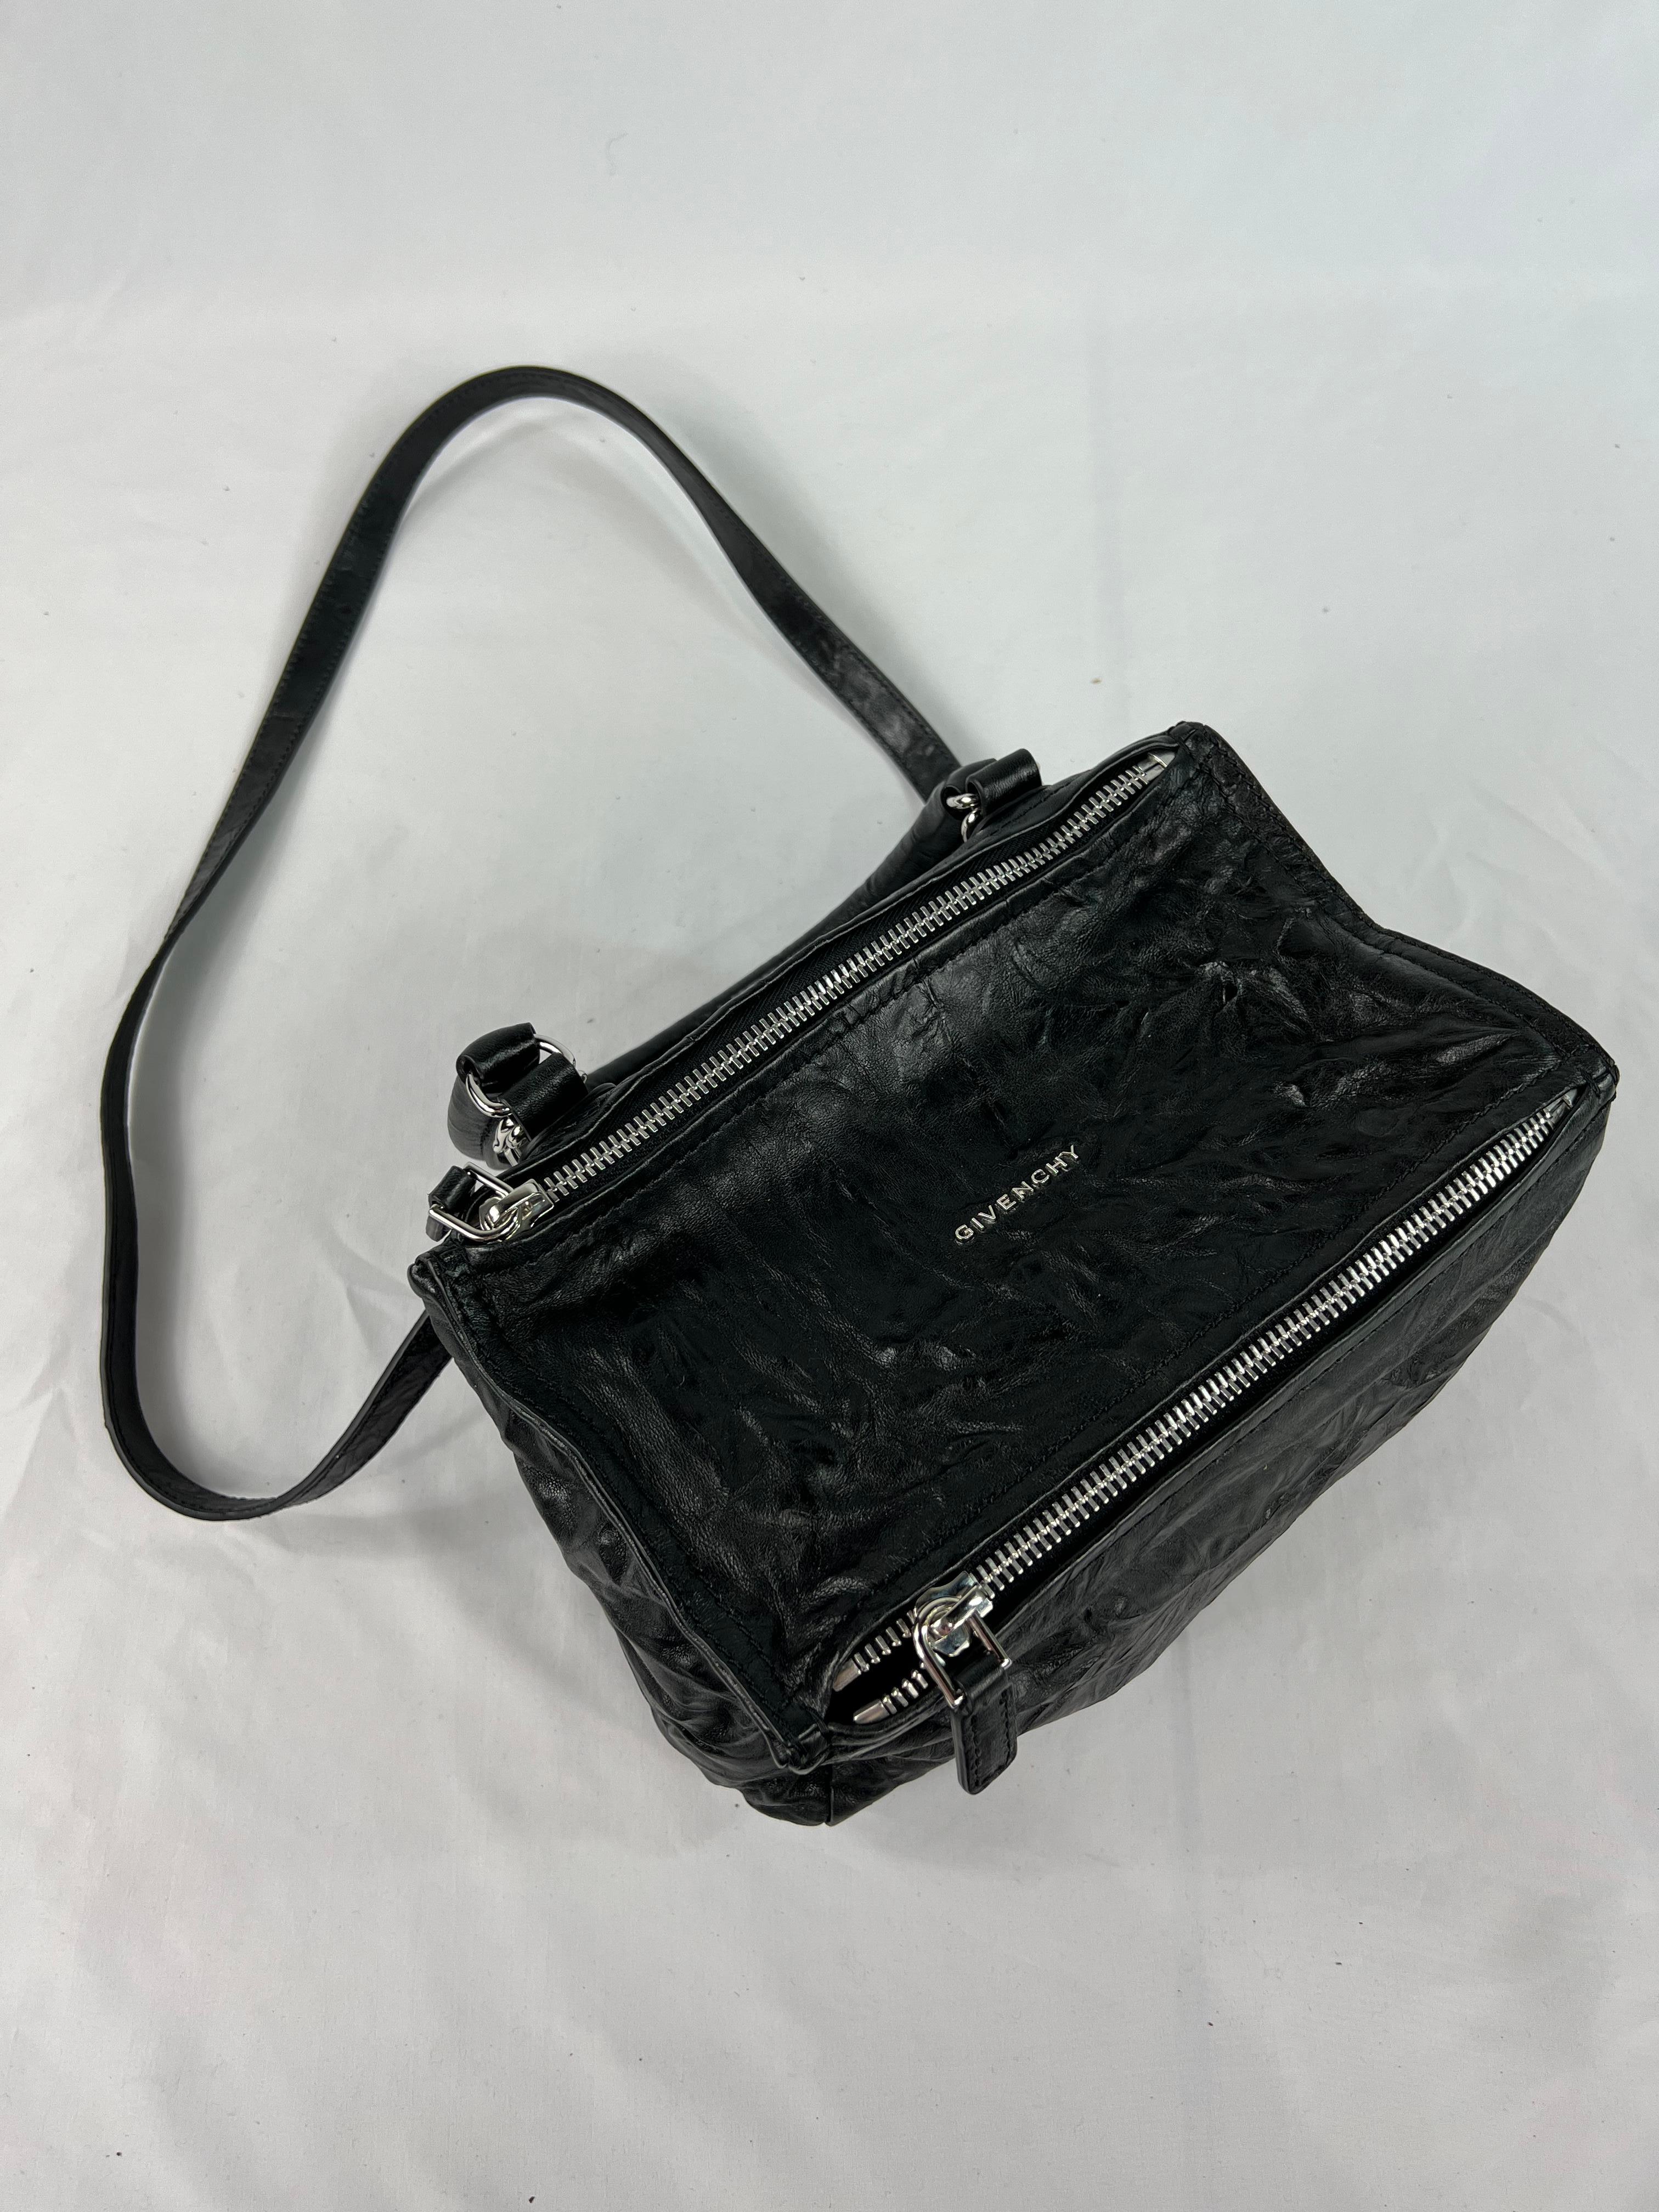 Product details:

The purse is made out of soft crinkle leather. It features silver tone dual top zippers, one interior zipped pocked and two open interior pockets, removable shoulder strap, measures 24 inches long and top handle that drops 5.5